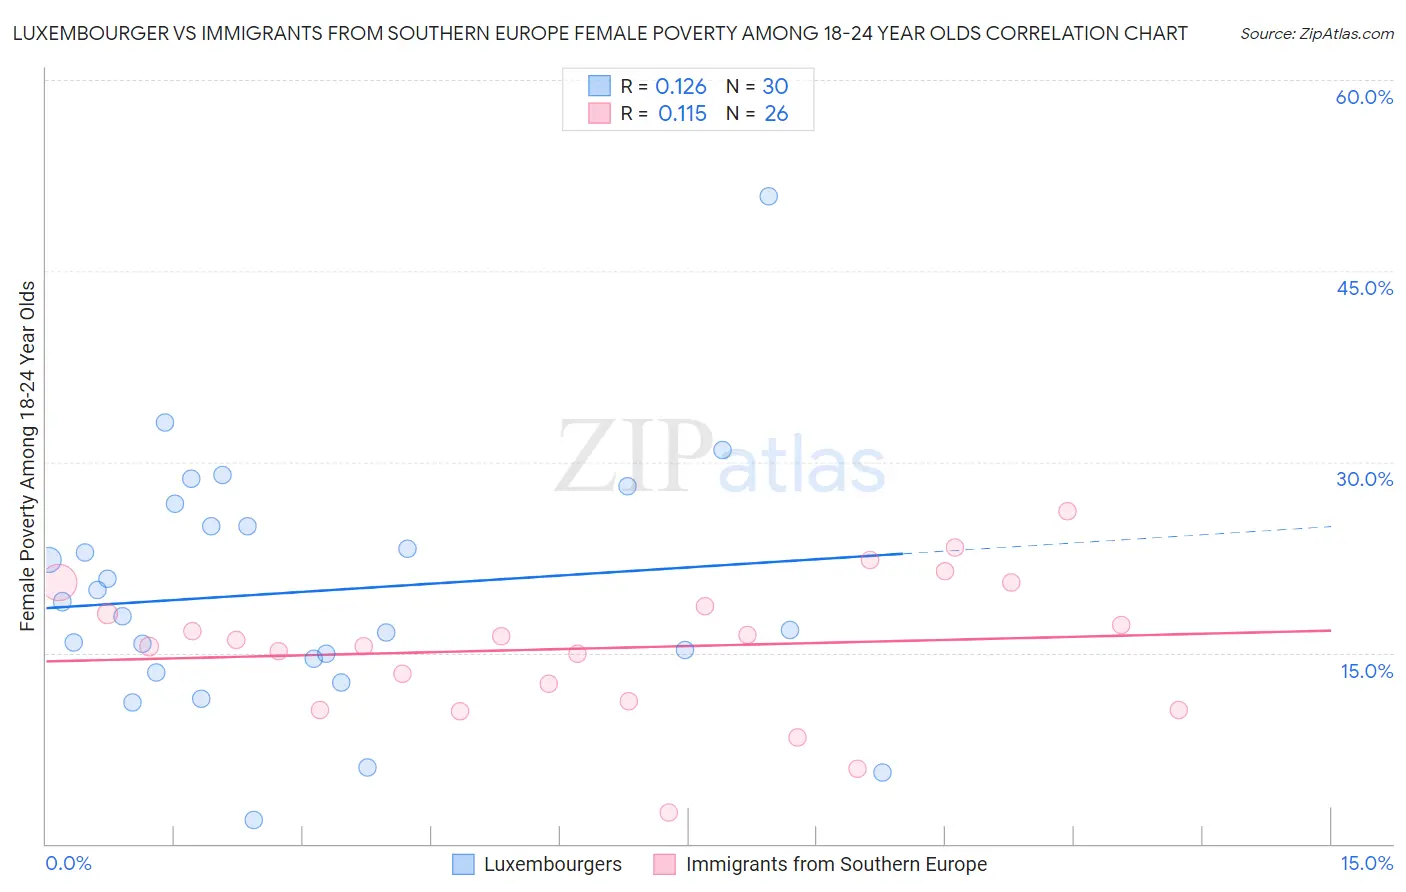 Luxembourger vs Immigrants from Southern Europe Female Poverty Among 18-24 Year Olds